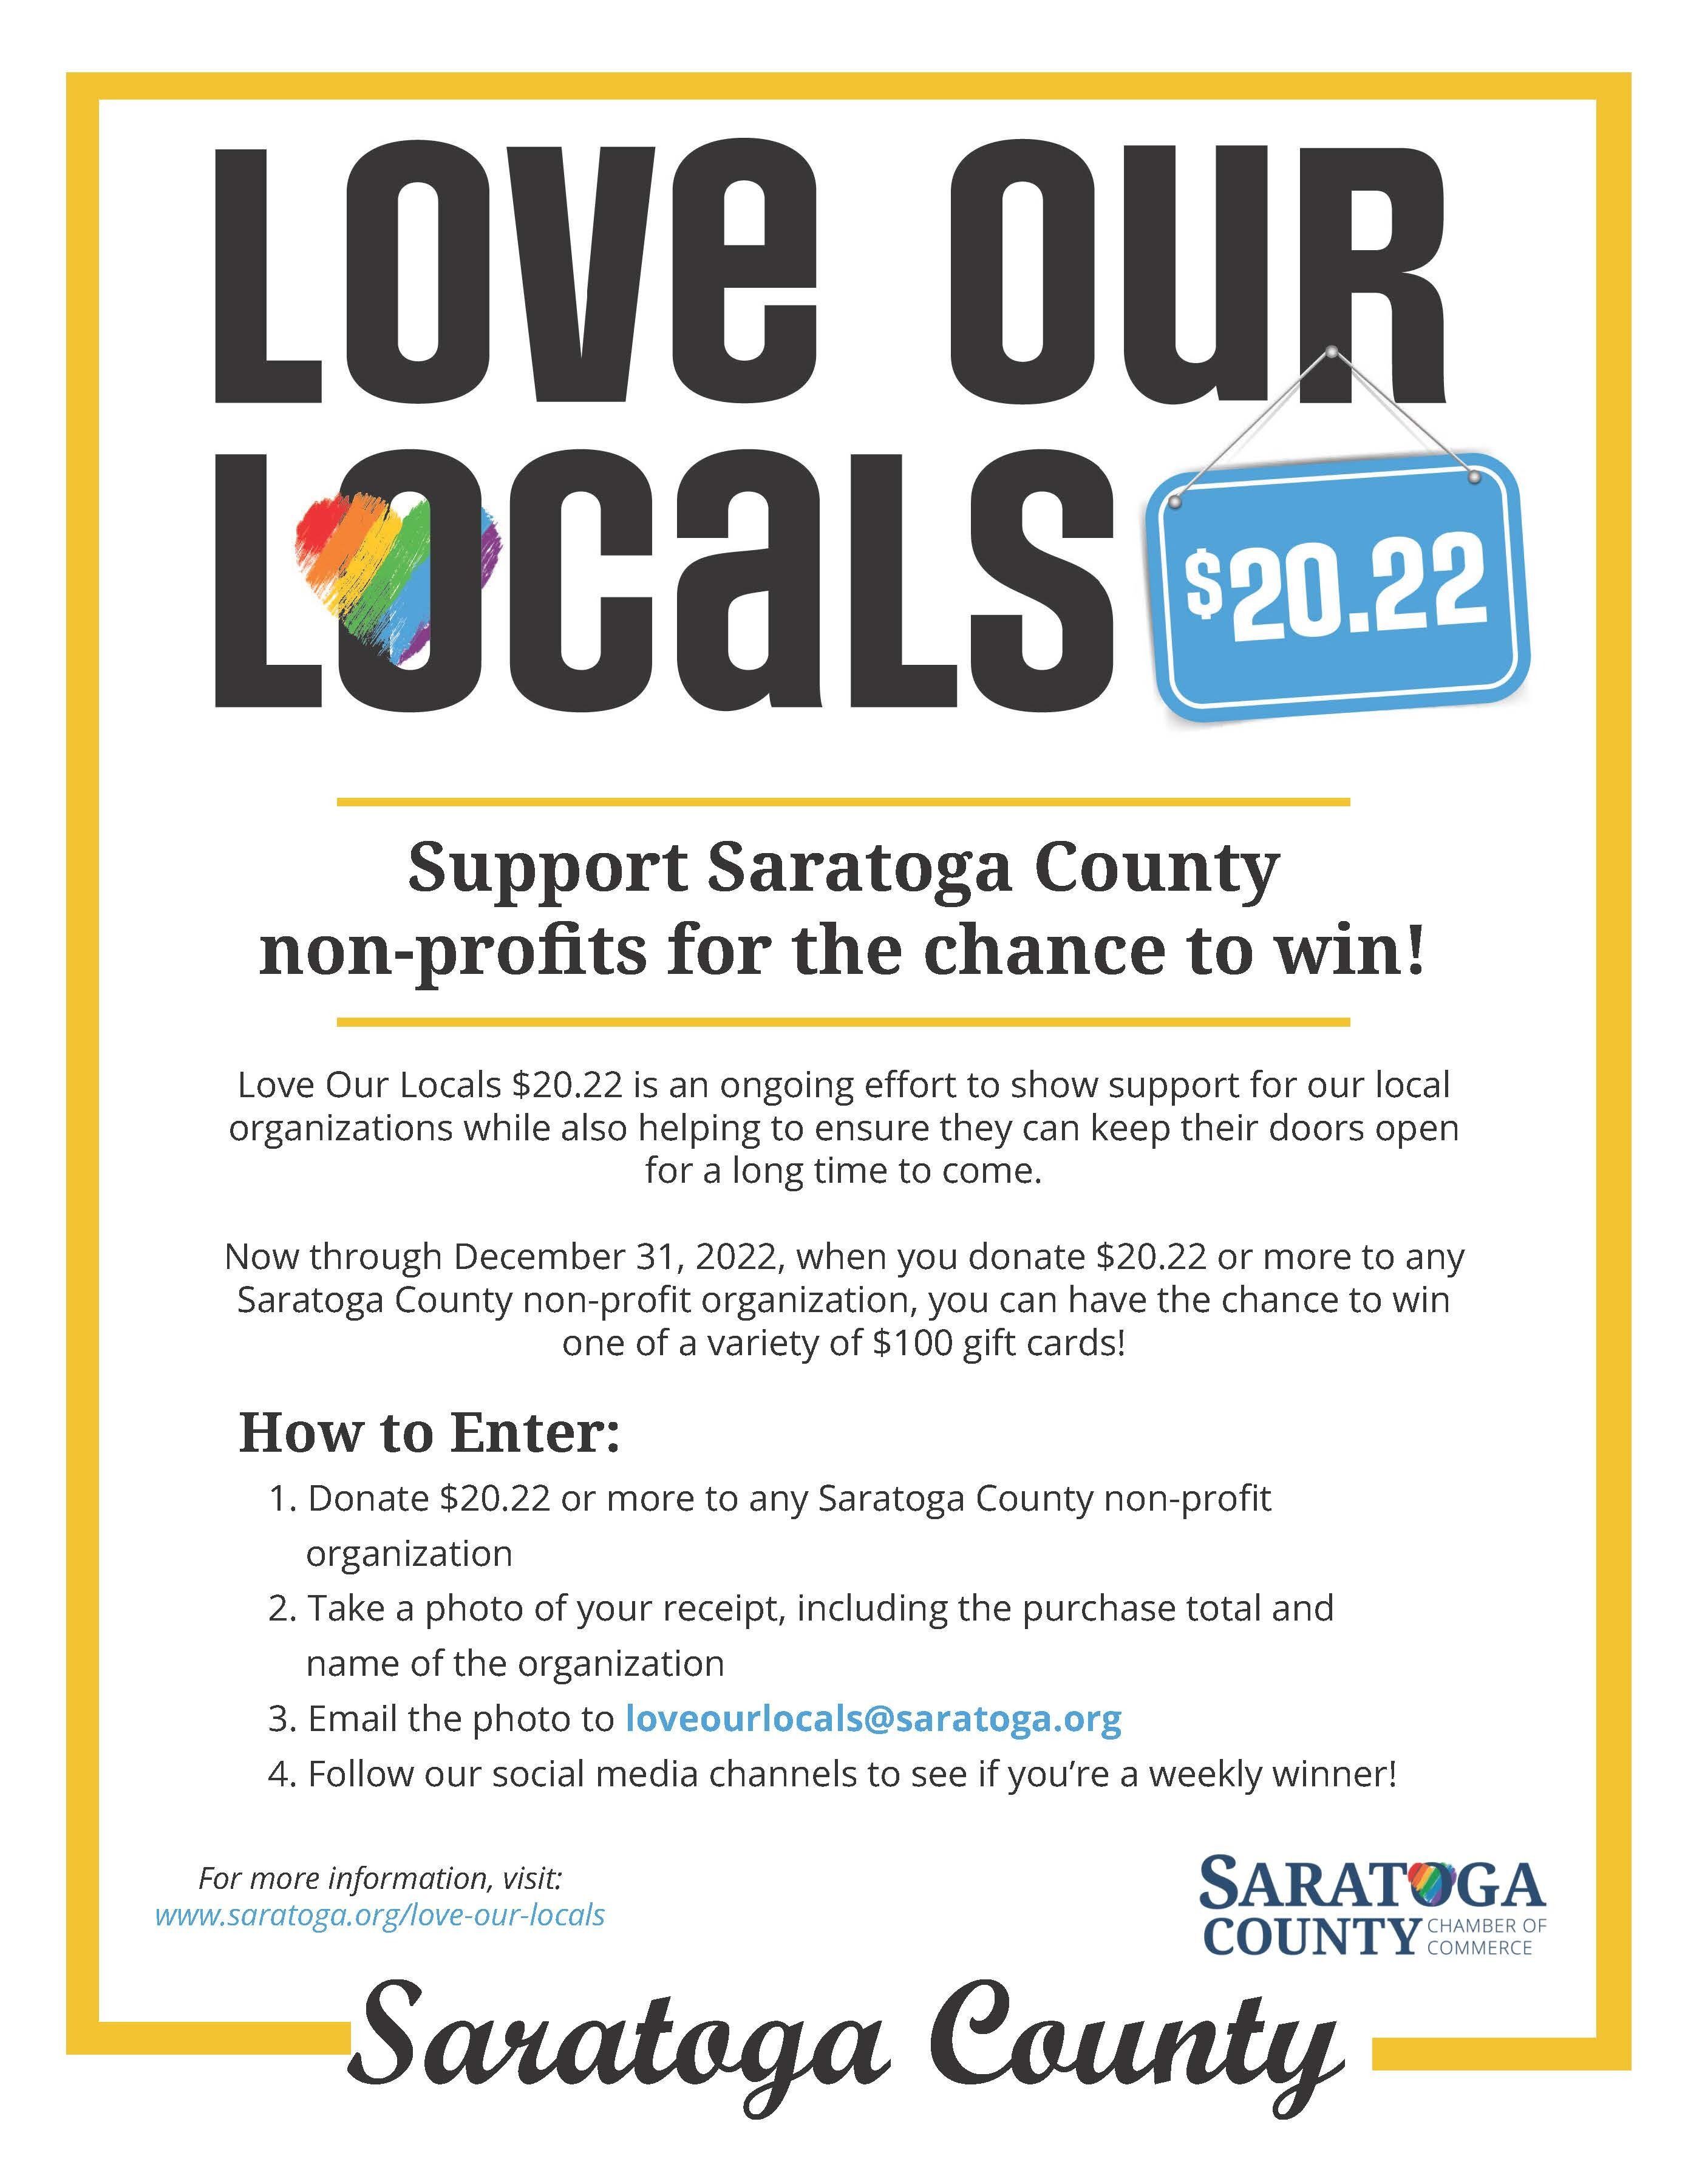 Saratoga County Chamber of Commerce Presents Love Our Locals!